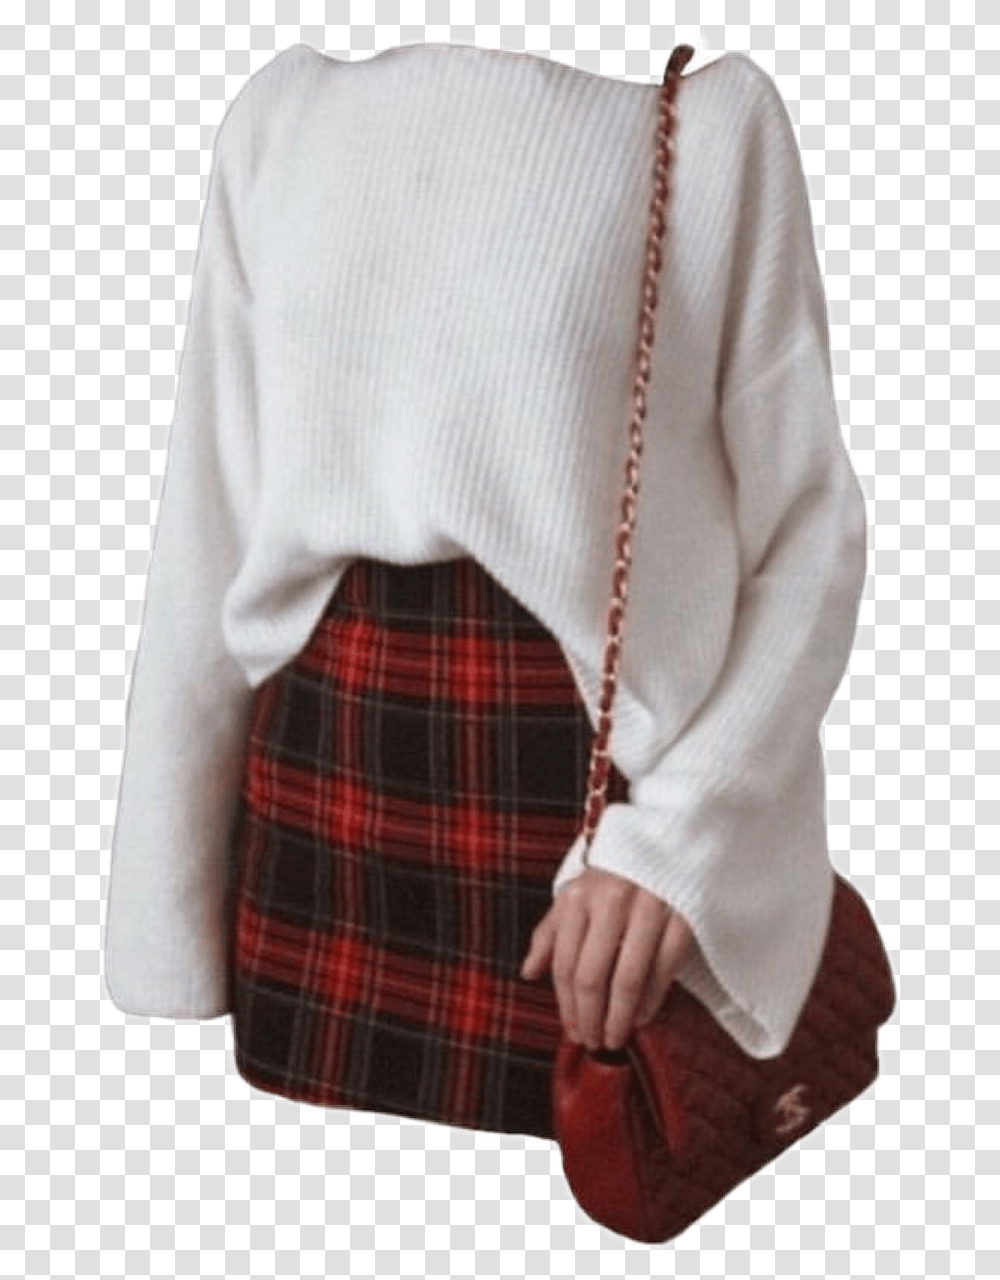 Outfit White Sweater Skirt Bag Filler Pngs Skirt Thinspo Outfits, Tartan, Person, Kilt Transparent Png